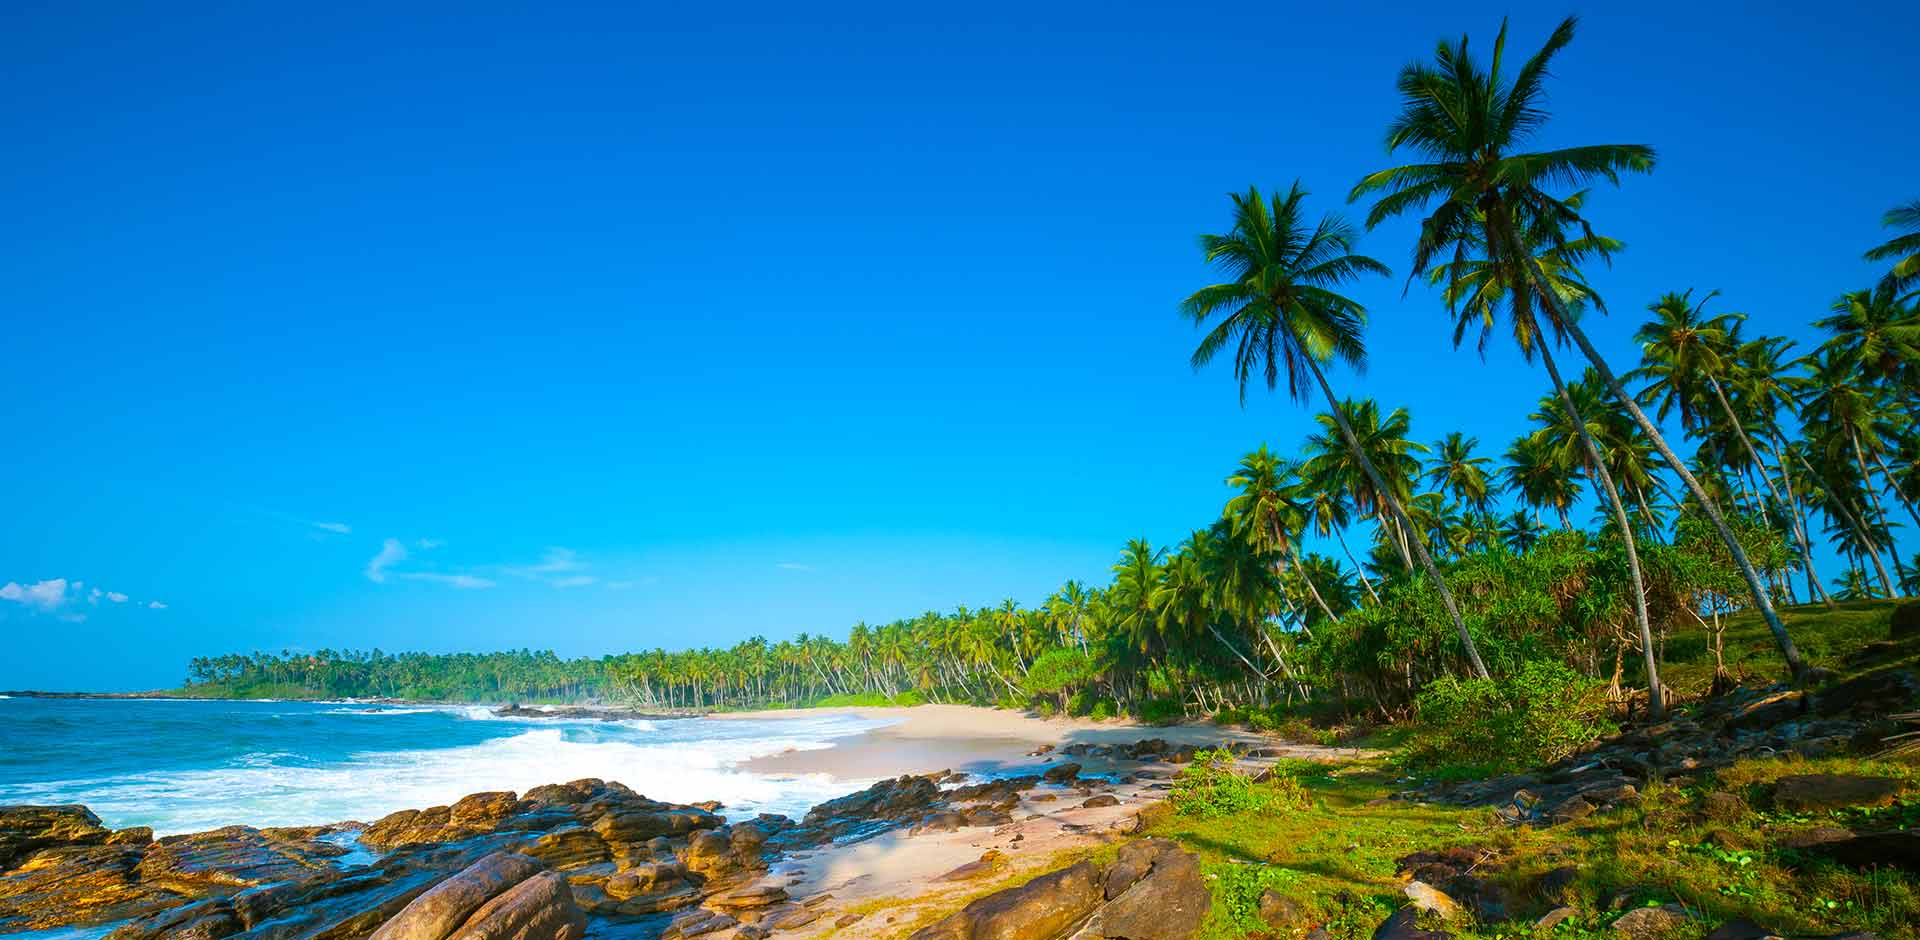 Tangalle